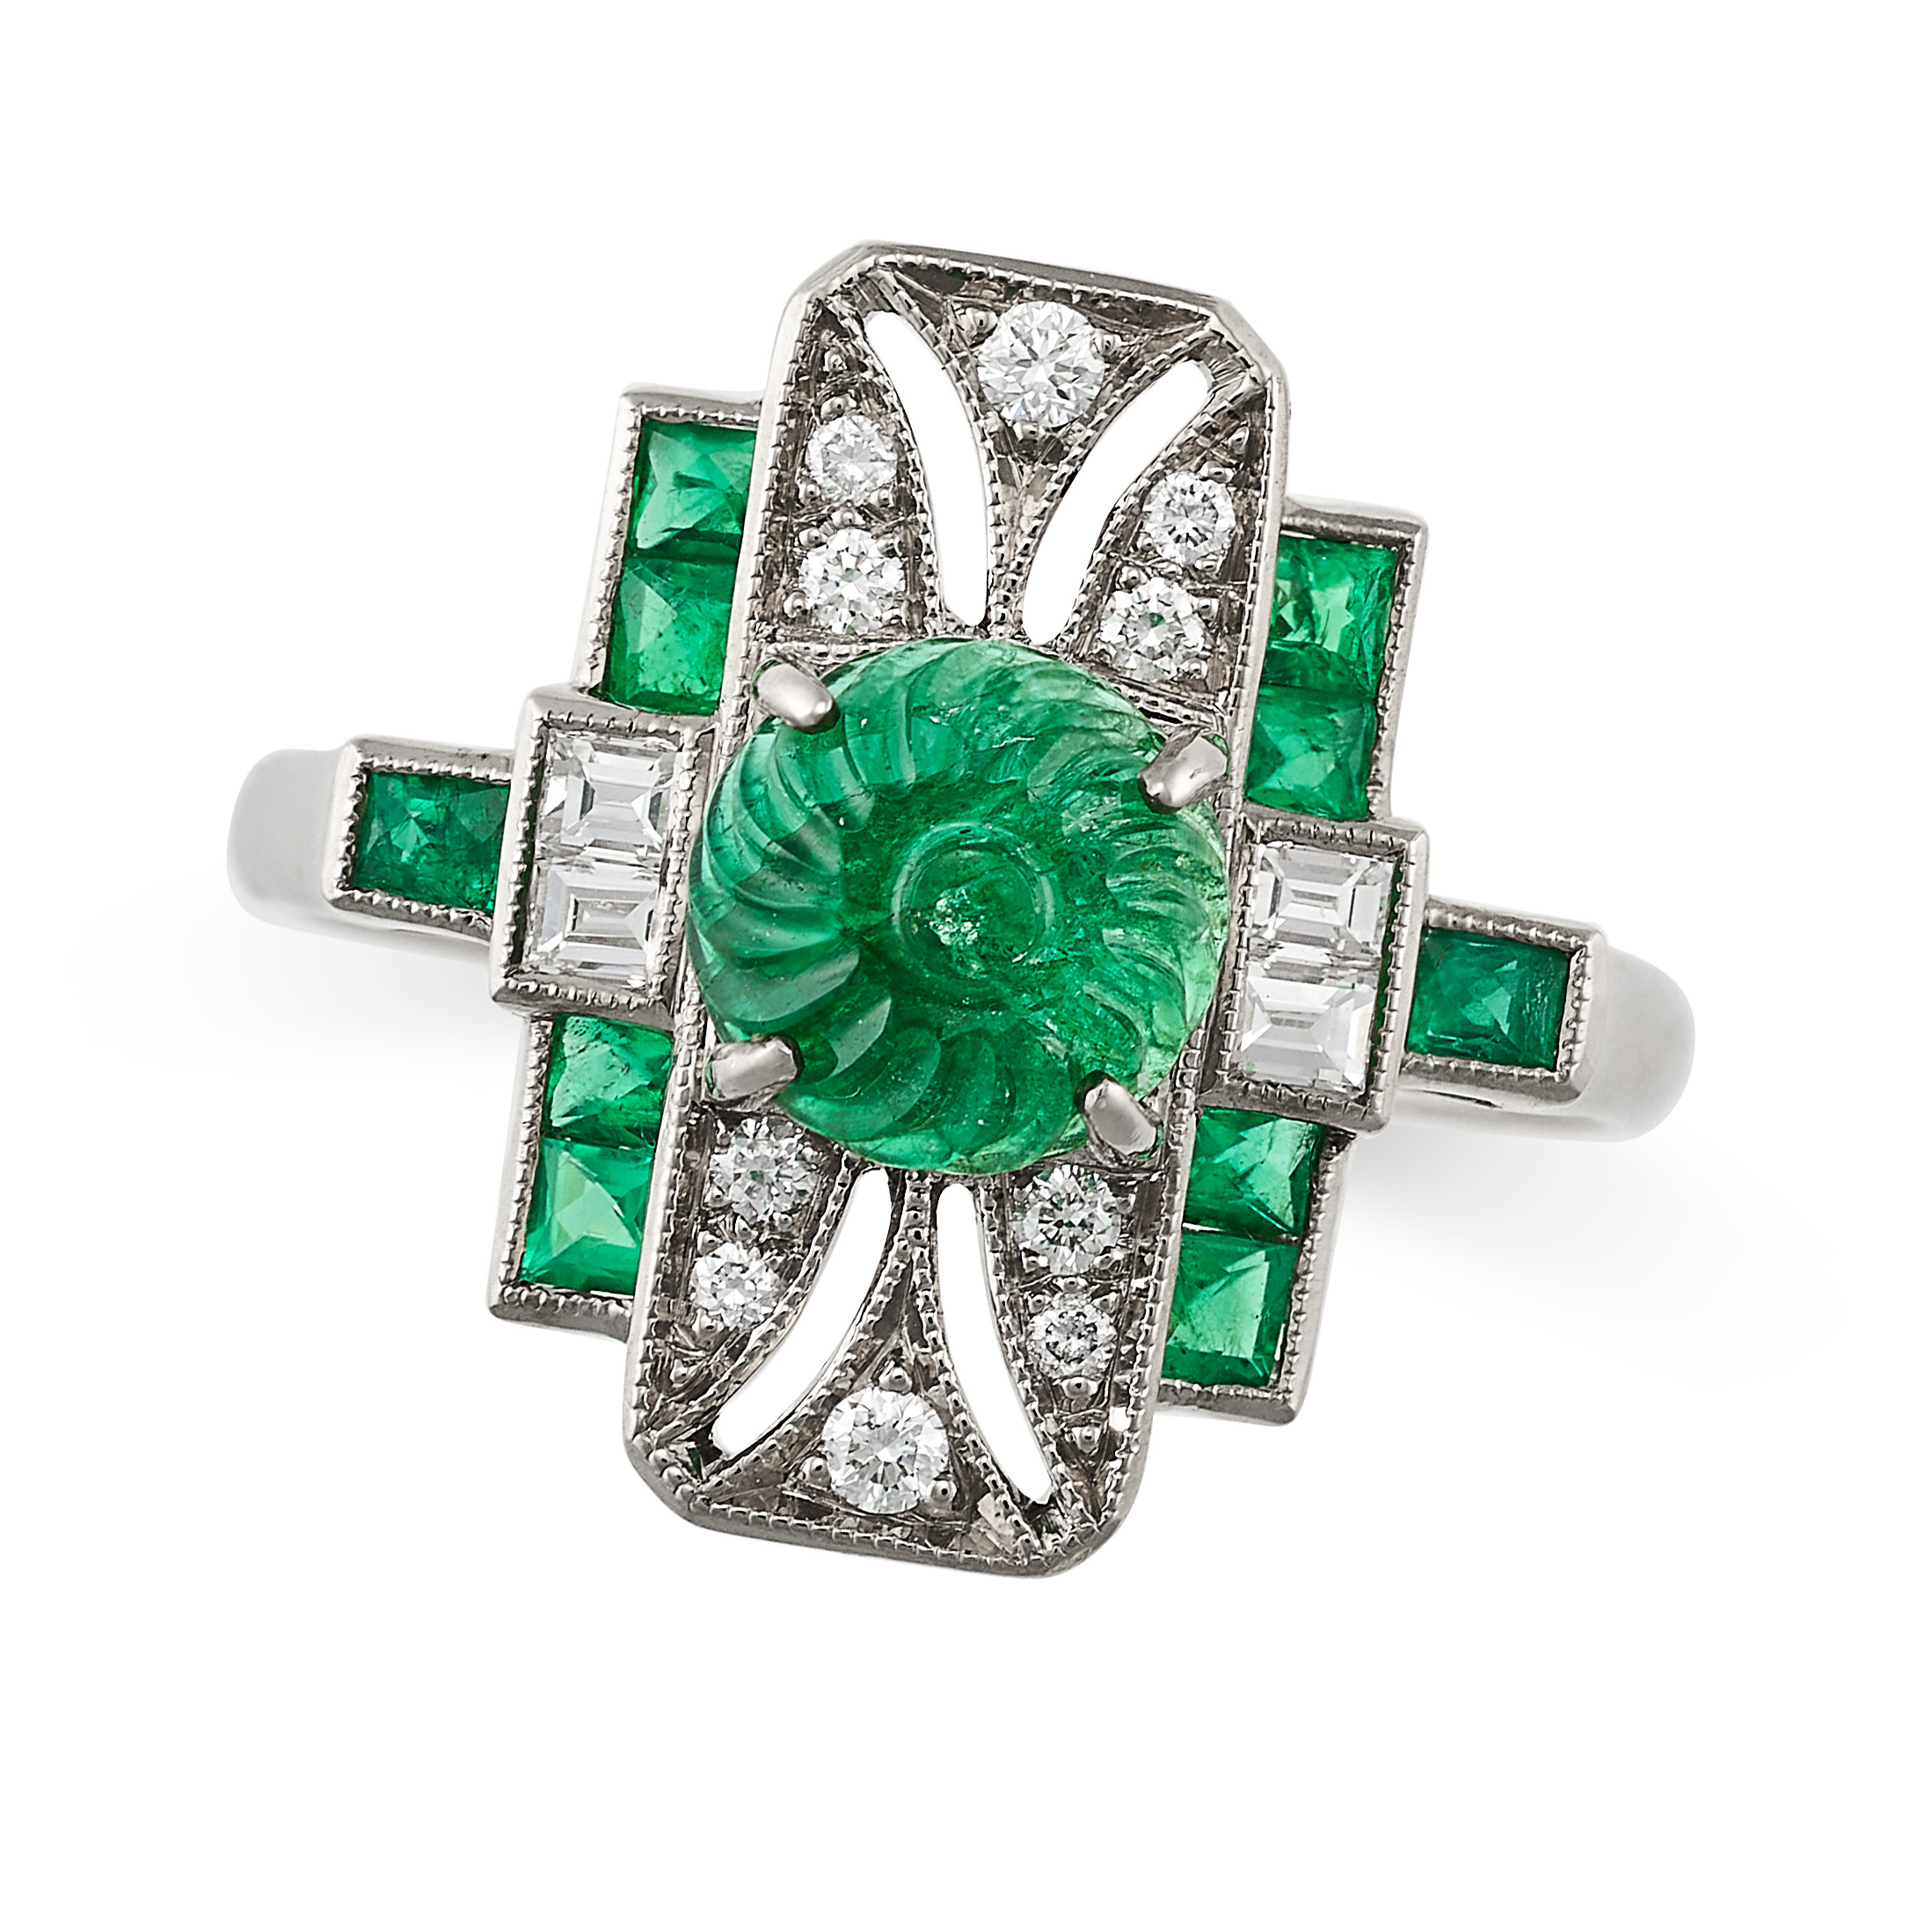 A CARVED EMERALD AND DIAMOND DRESS RING in 18ct white gold, set with a carved cabochon emerald of